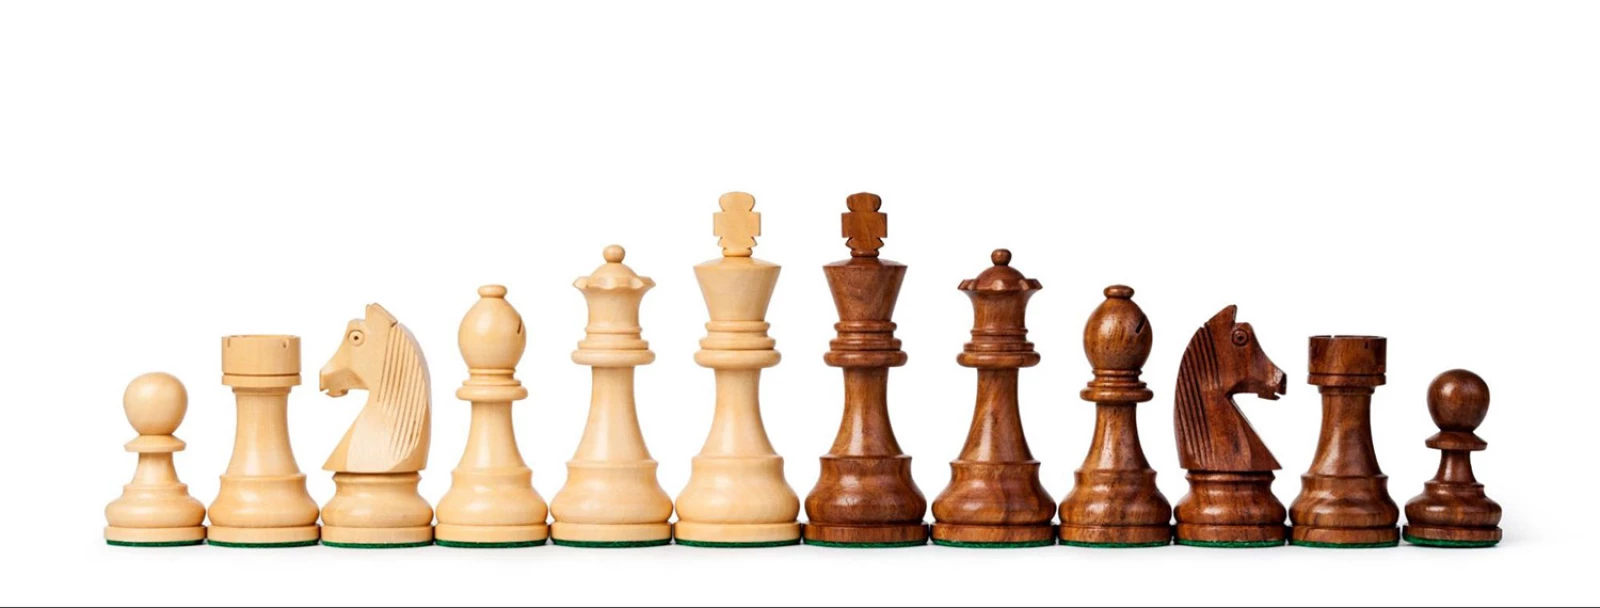 Learn to Play Chess Like a Boss: Make Pawns of Your Opponents with